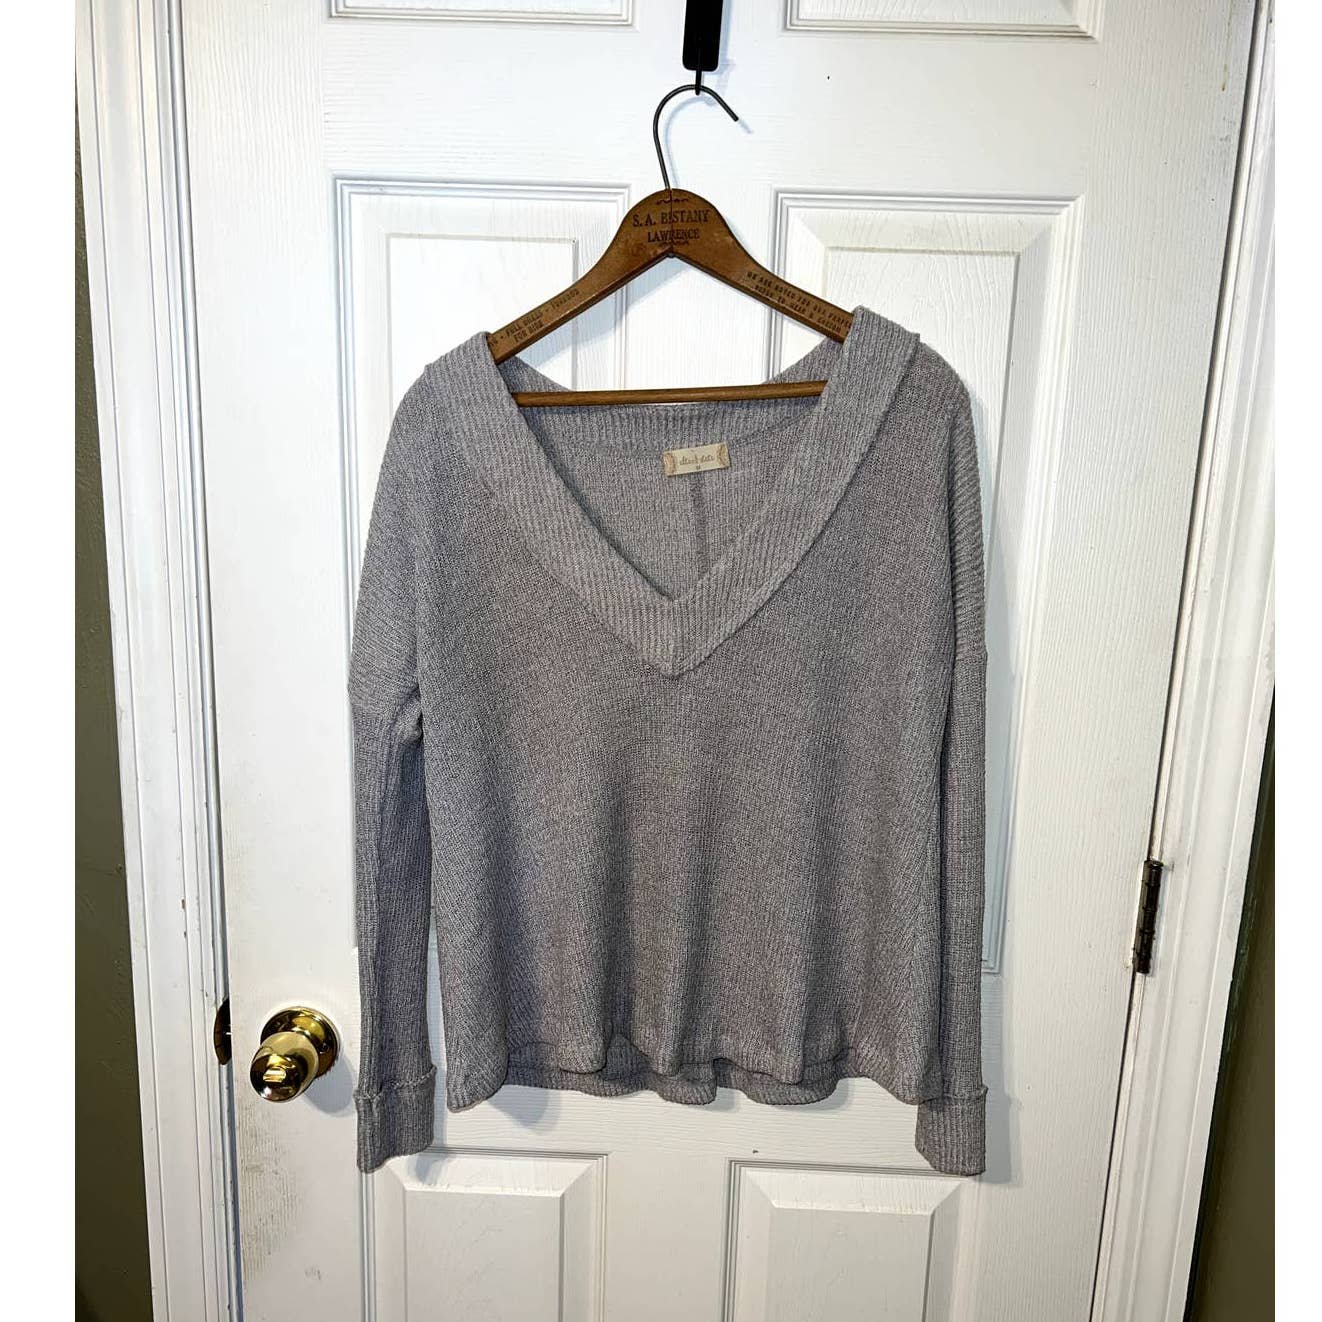 good price Altar´d State gray vneck knit sweater s